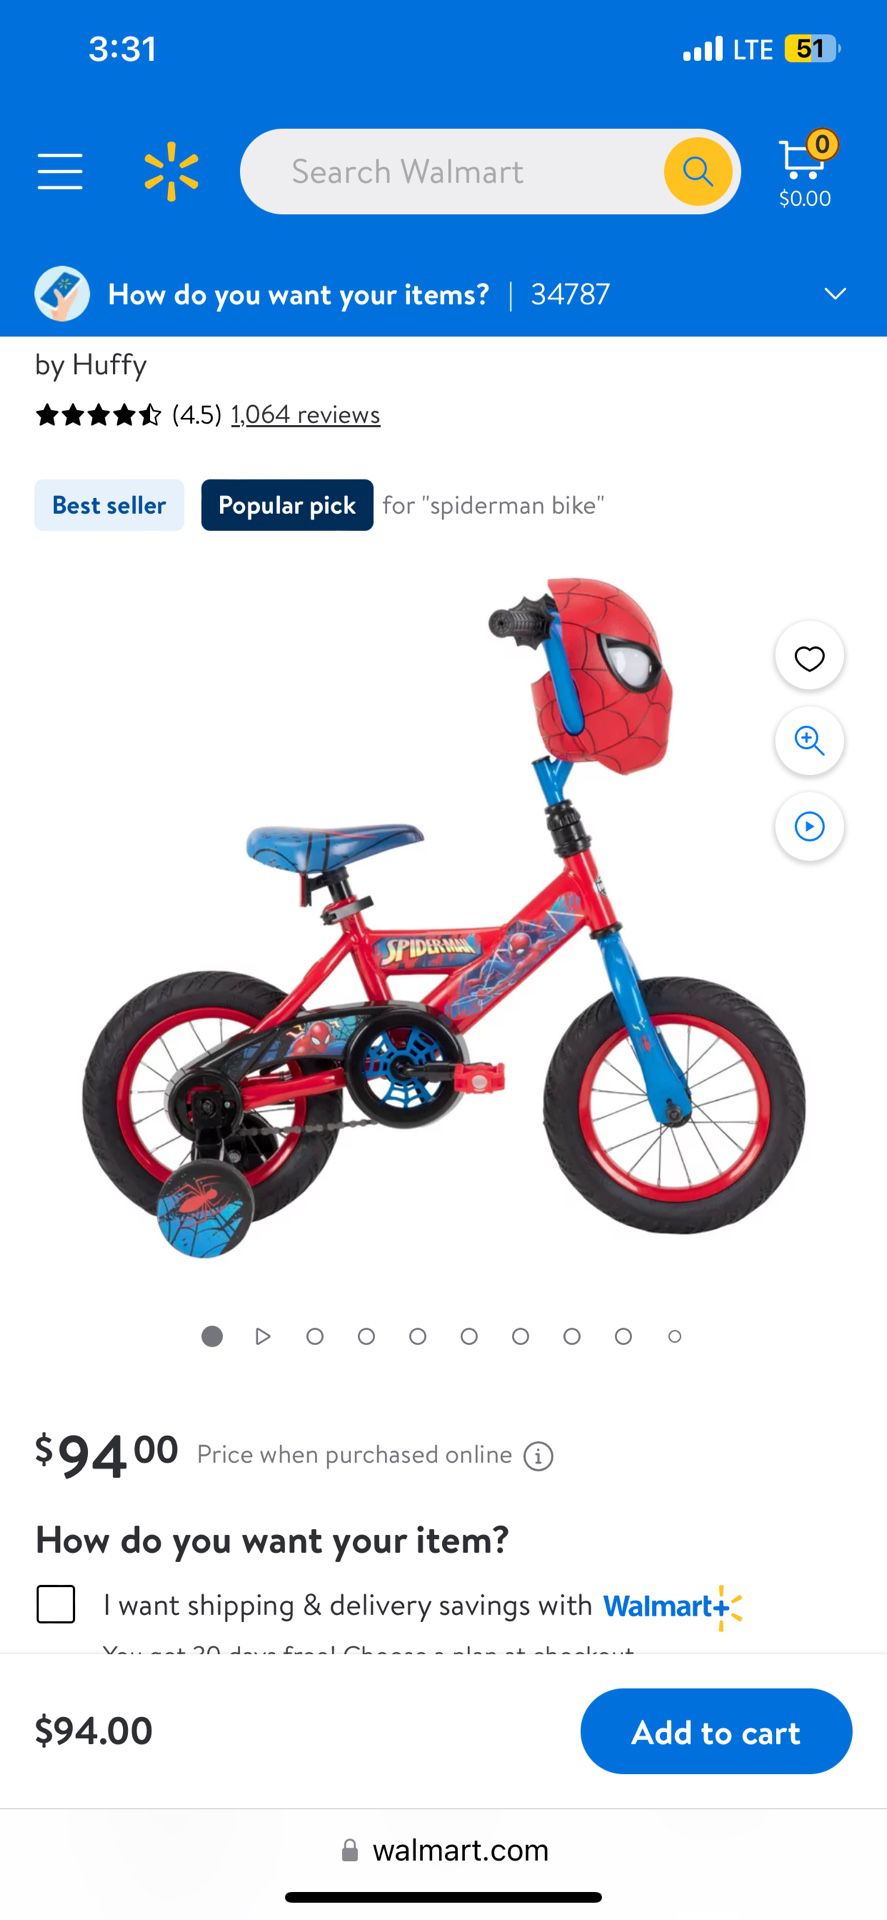 Marvel 12" Marvel Spider-Man Bike with Training Wheels, for Boys', Red by Huffy